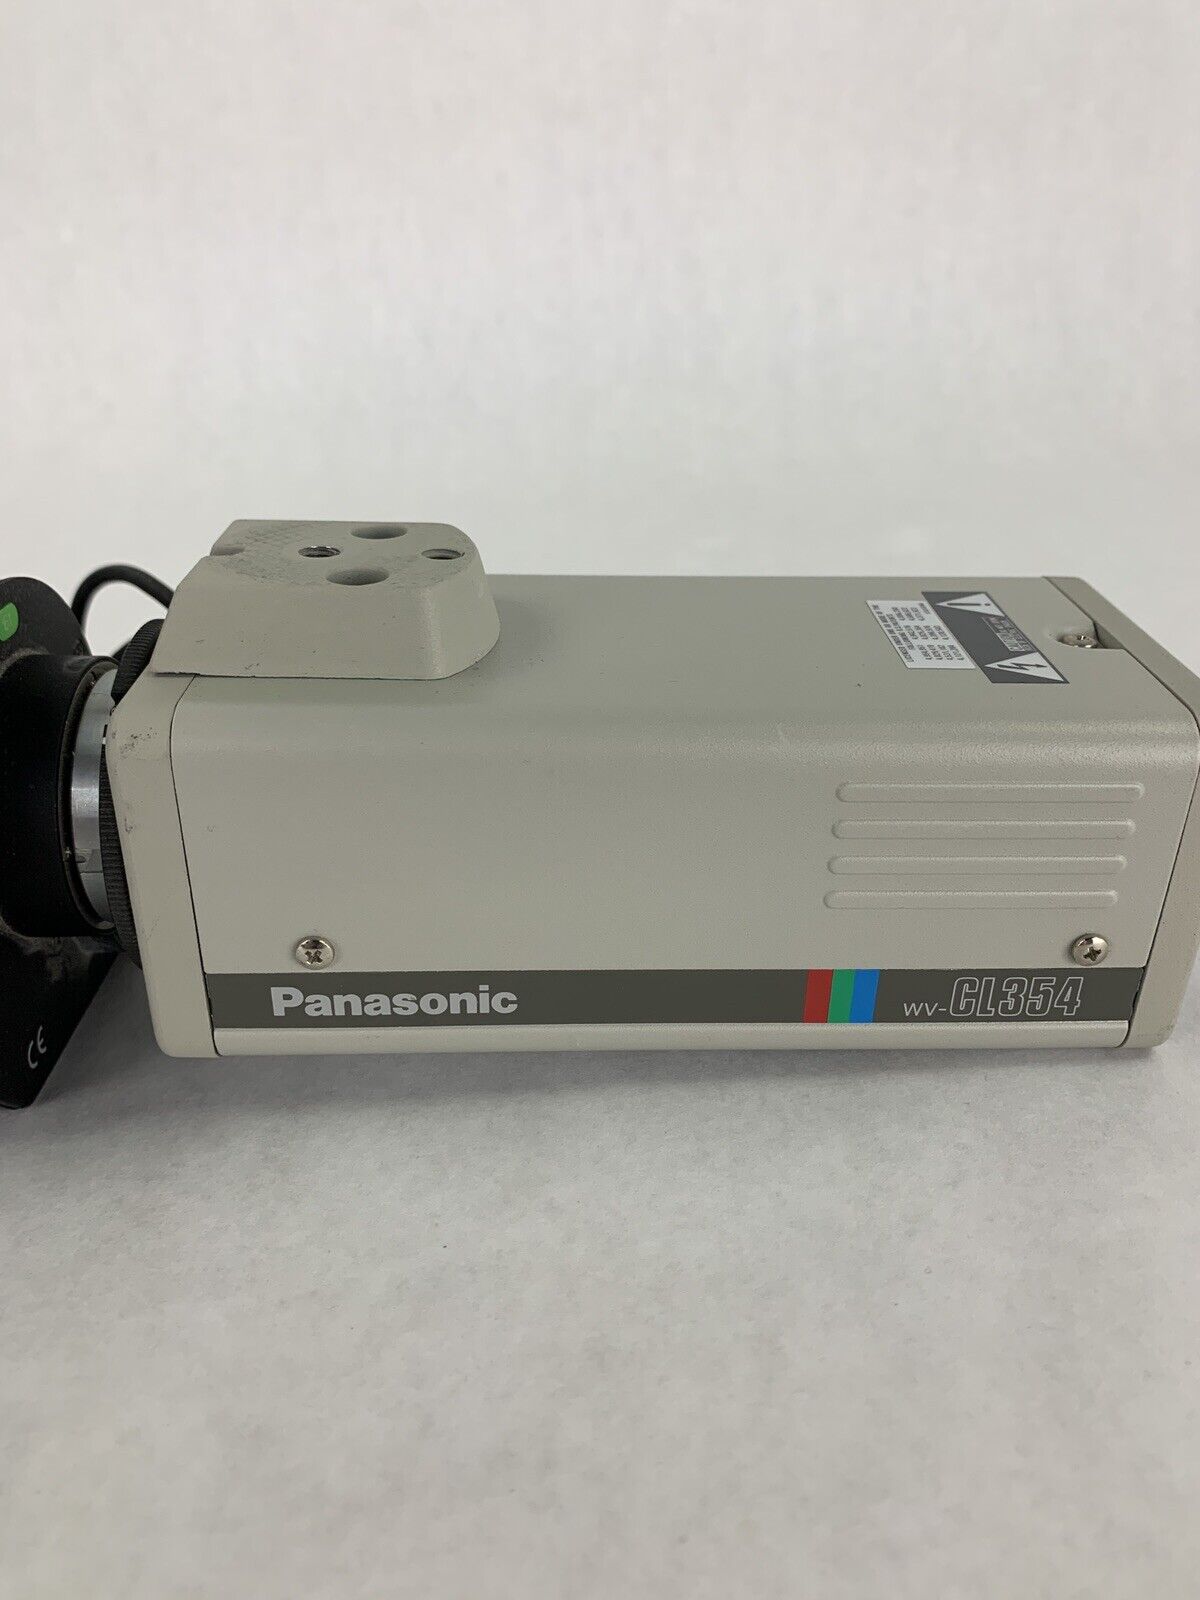 Panasonic WV-CL354 Color Digital Camera with Computar TV Zoom Lens 1:1.8 Tested